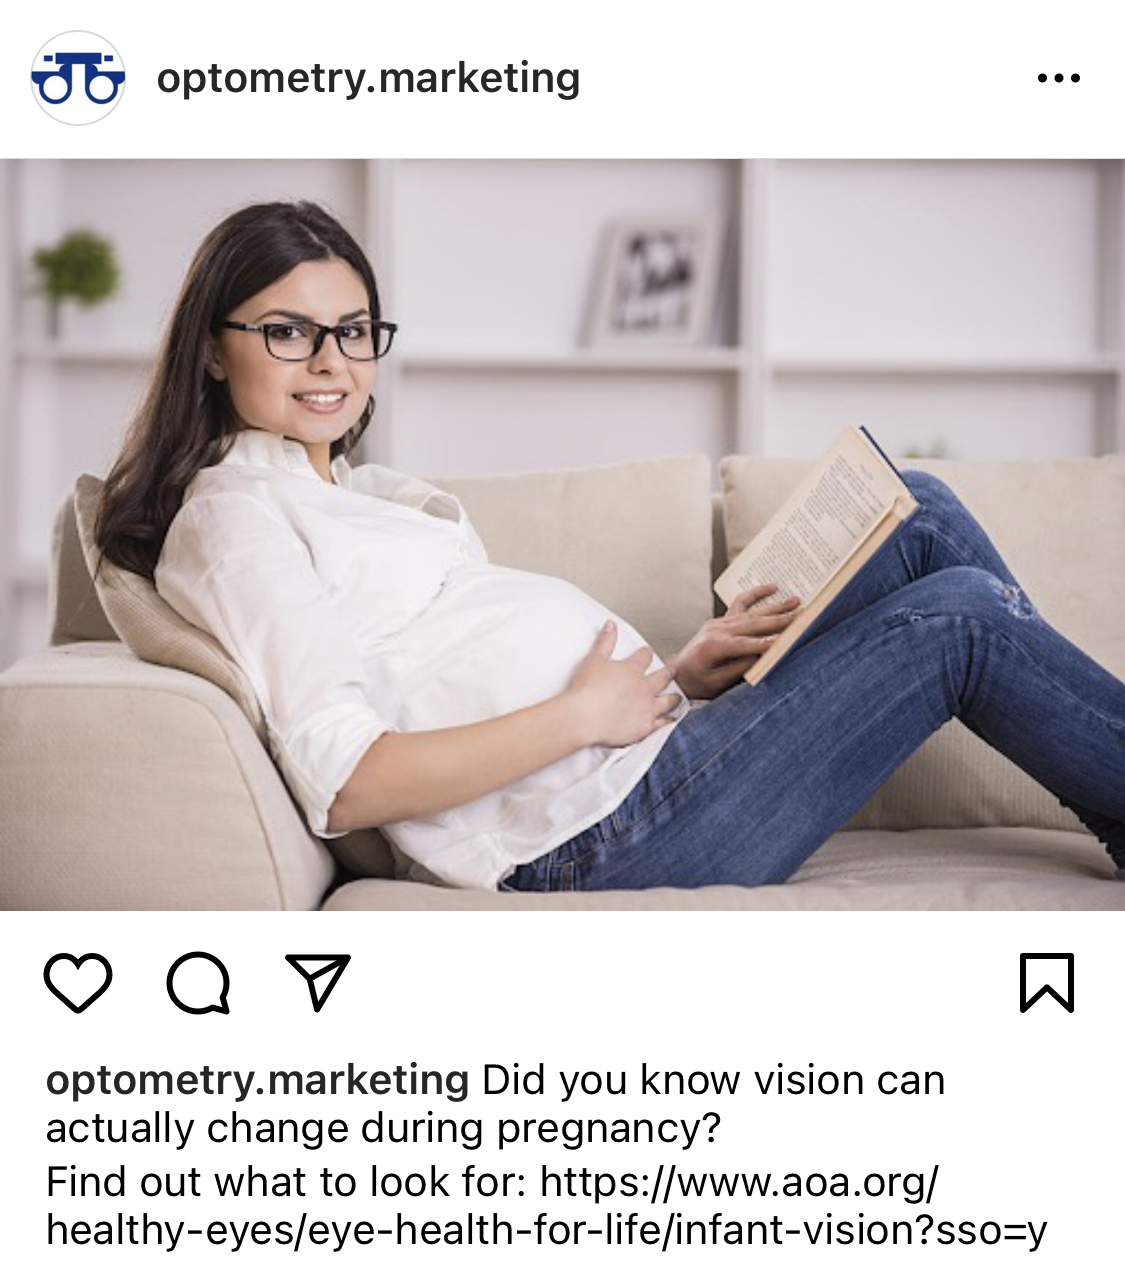 The Ultimate Social Media Posting Guide for Optometrists